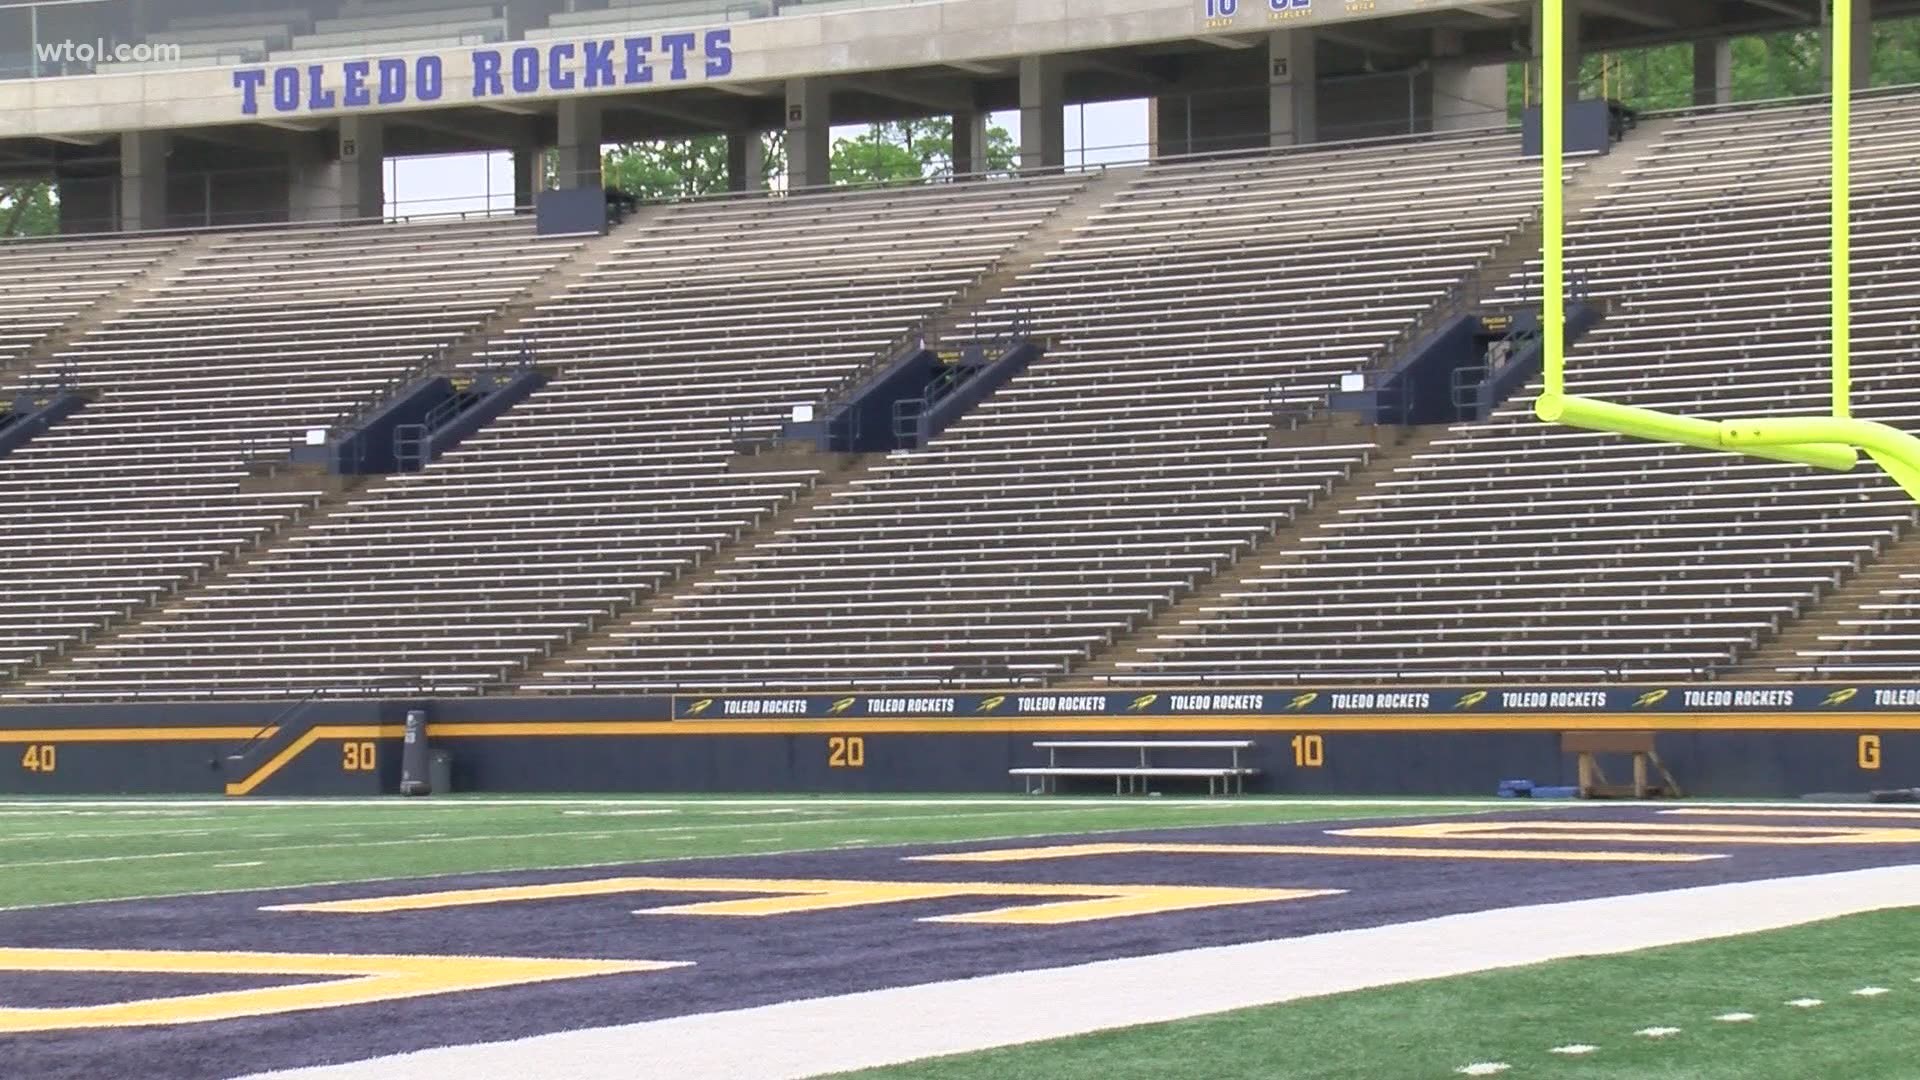 UToledo's Director of Athletics and Vice President says they are doing whatever they can to make sure the Rocket experience is just as normal as it was 2 years ago.